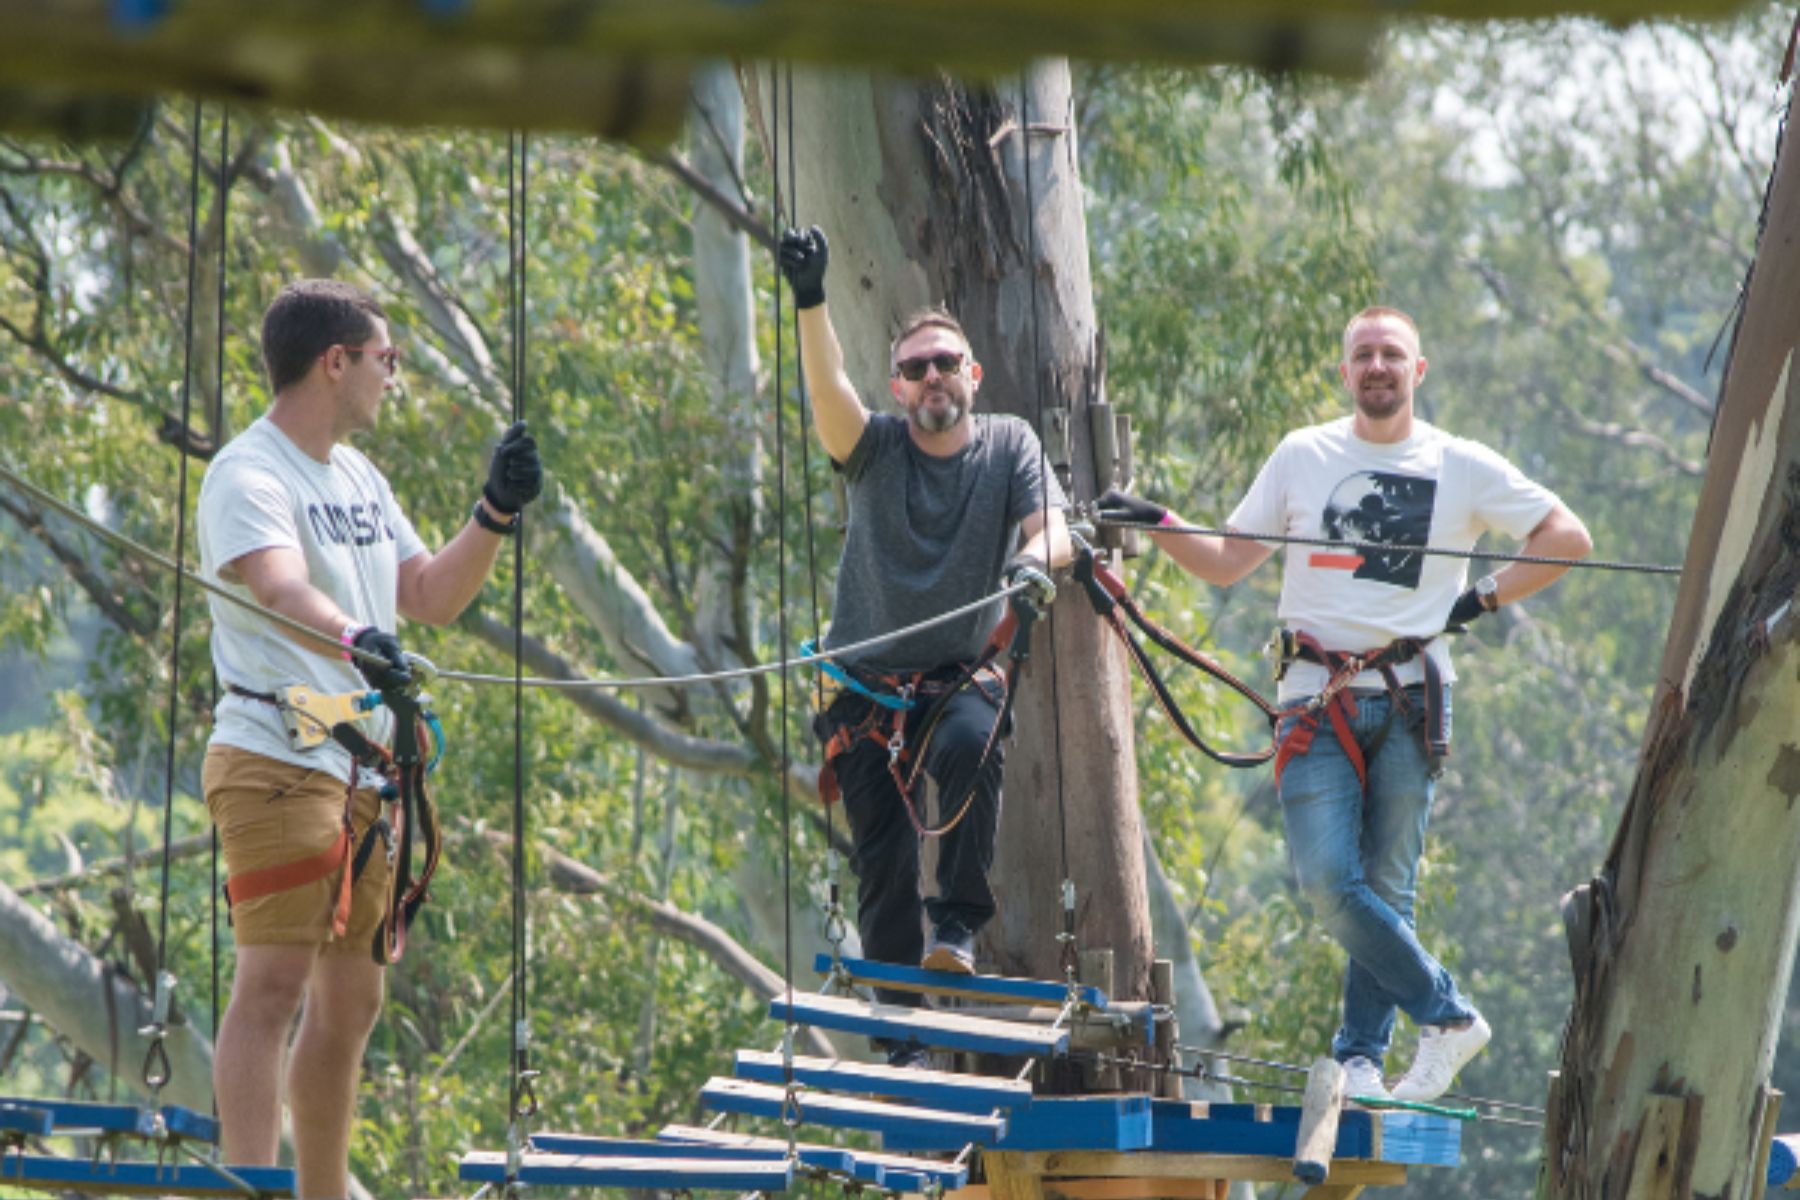 Go on a treetop adventure at Acrobranch Melrose